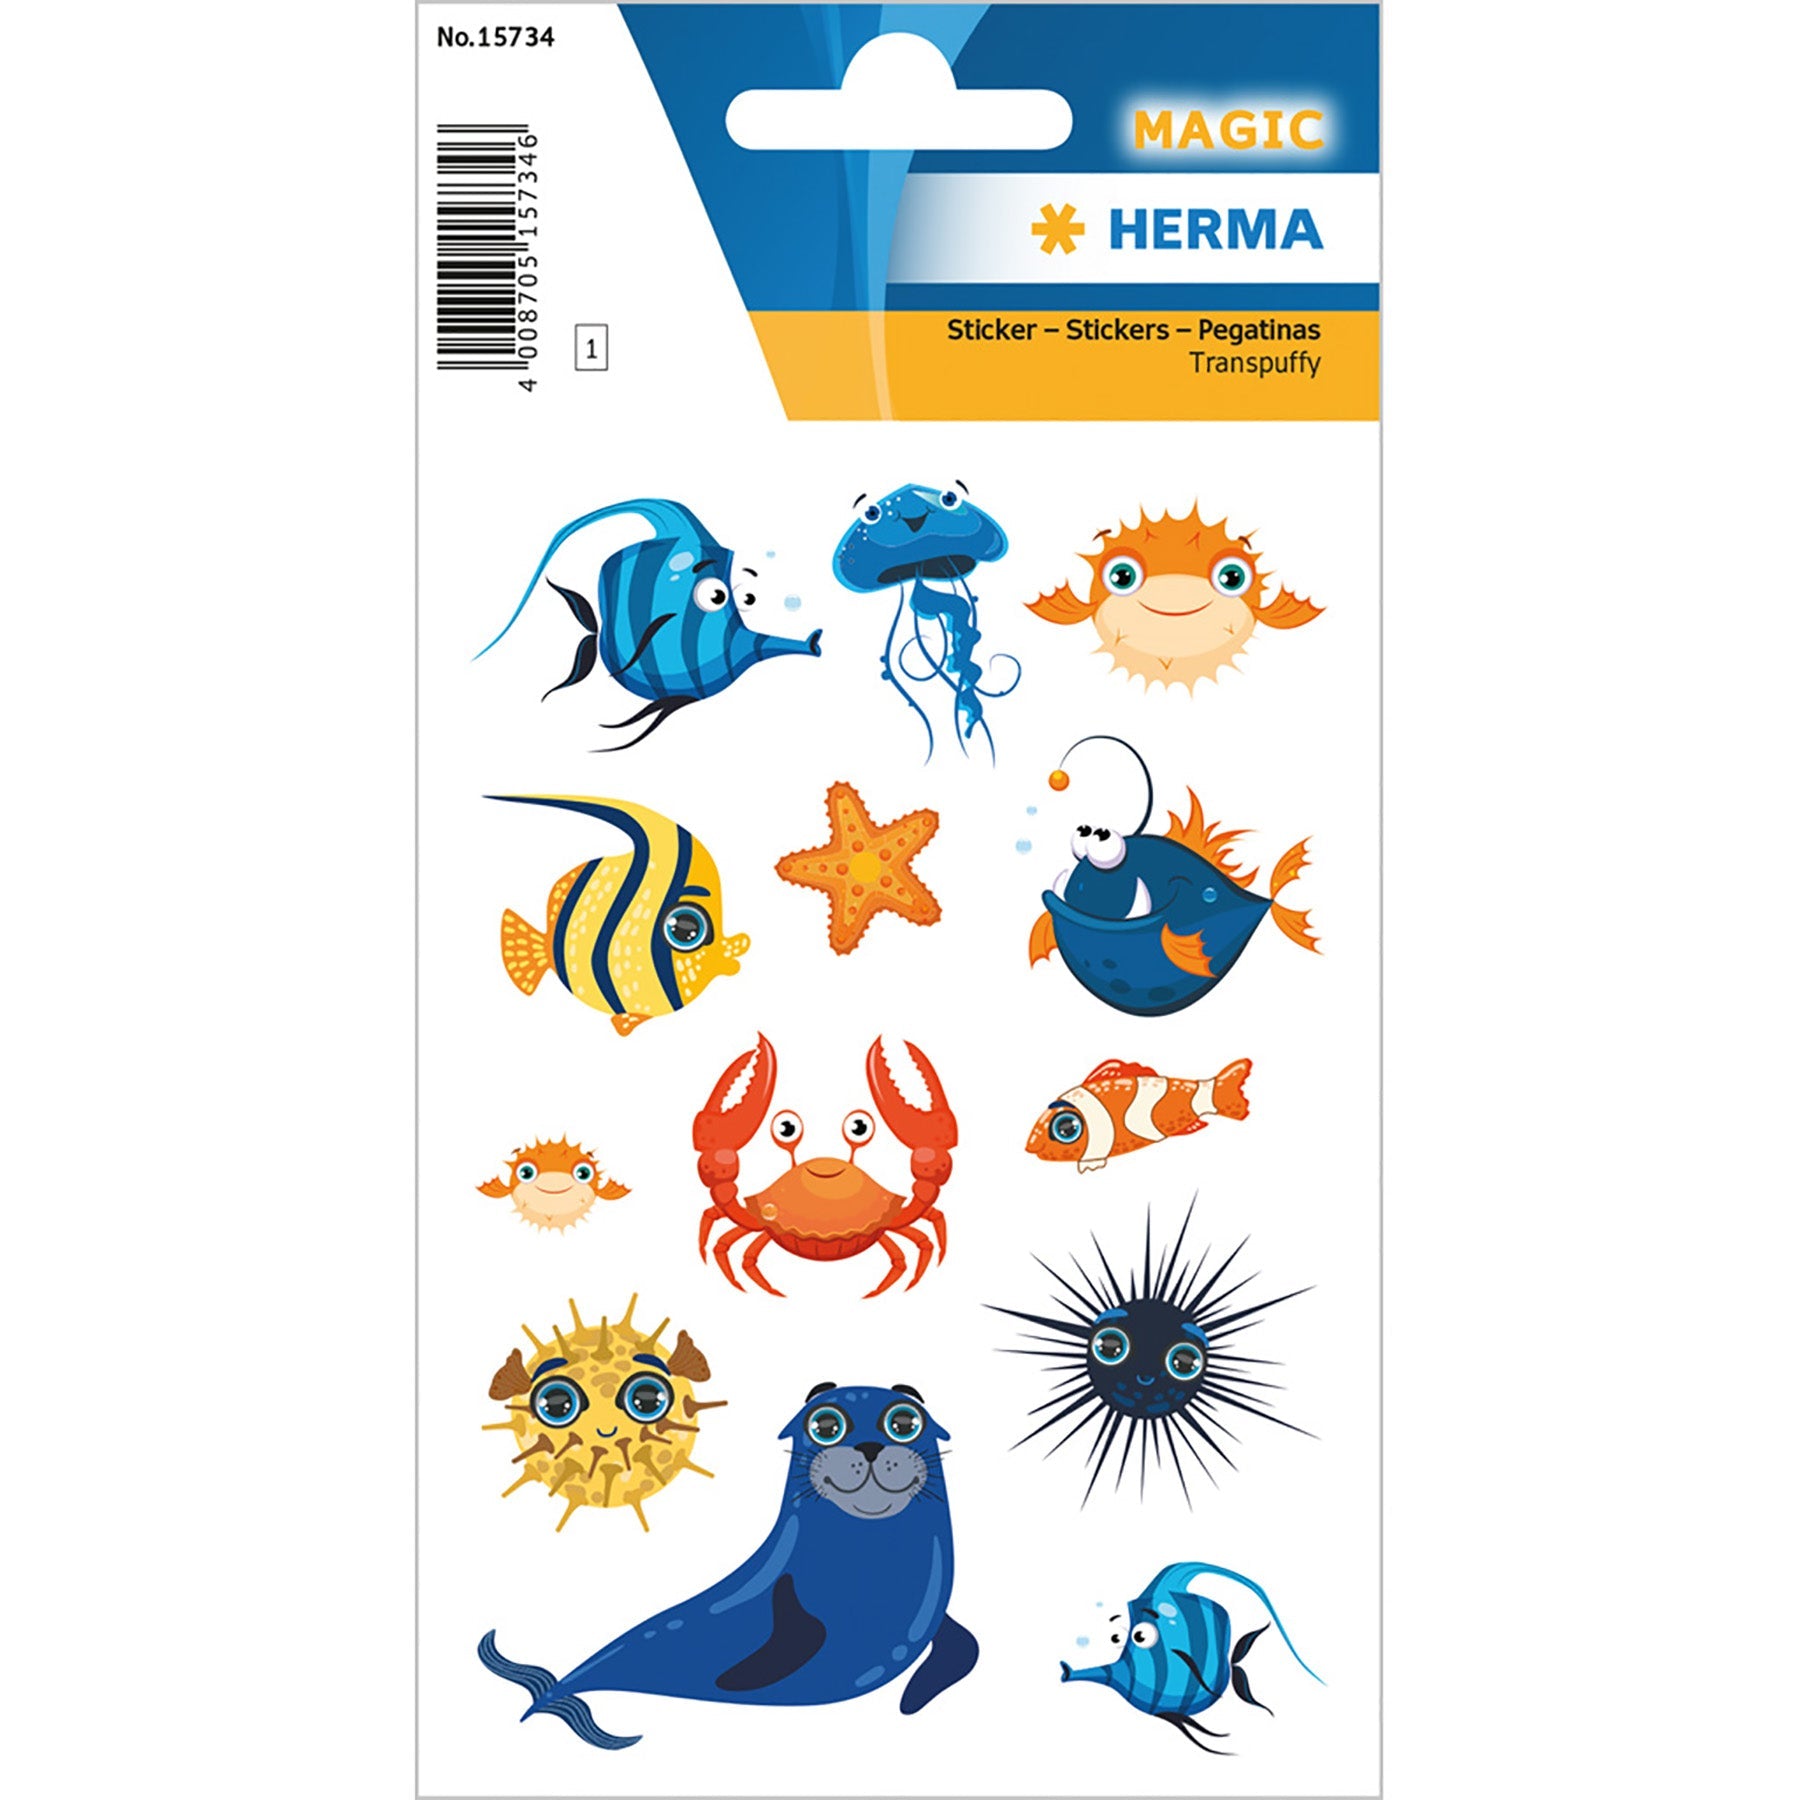 Herma Magic Stickers Cheaky Sea Creatures Transpuffy 4.75x3.1in Sheet